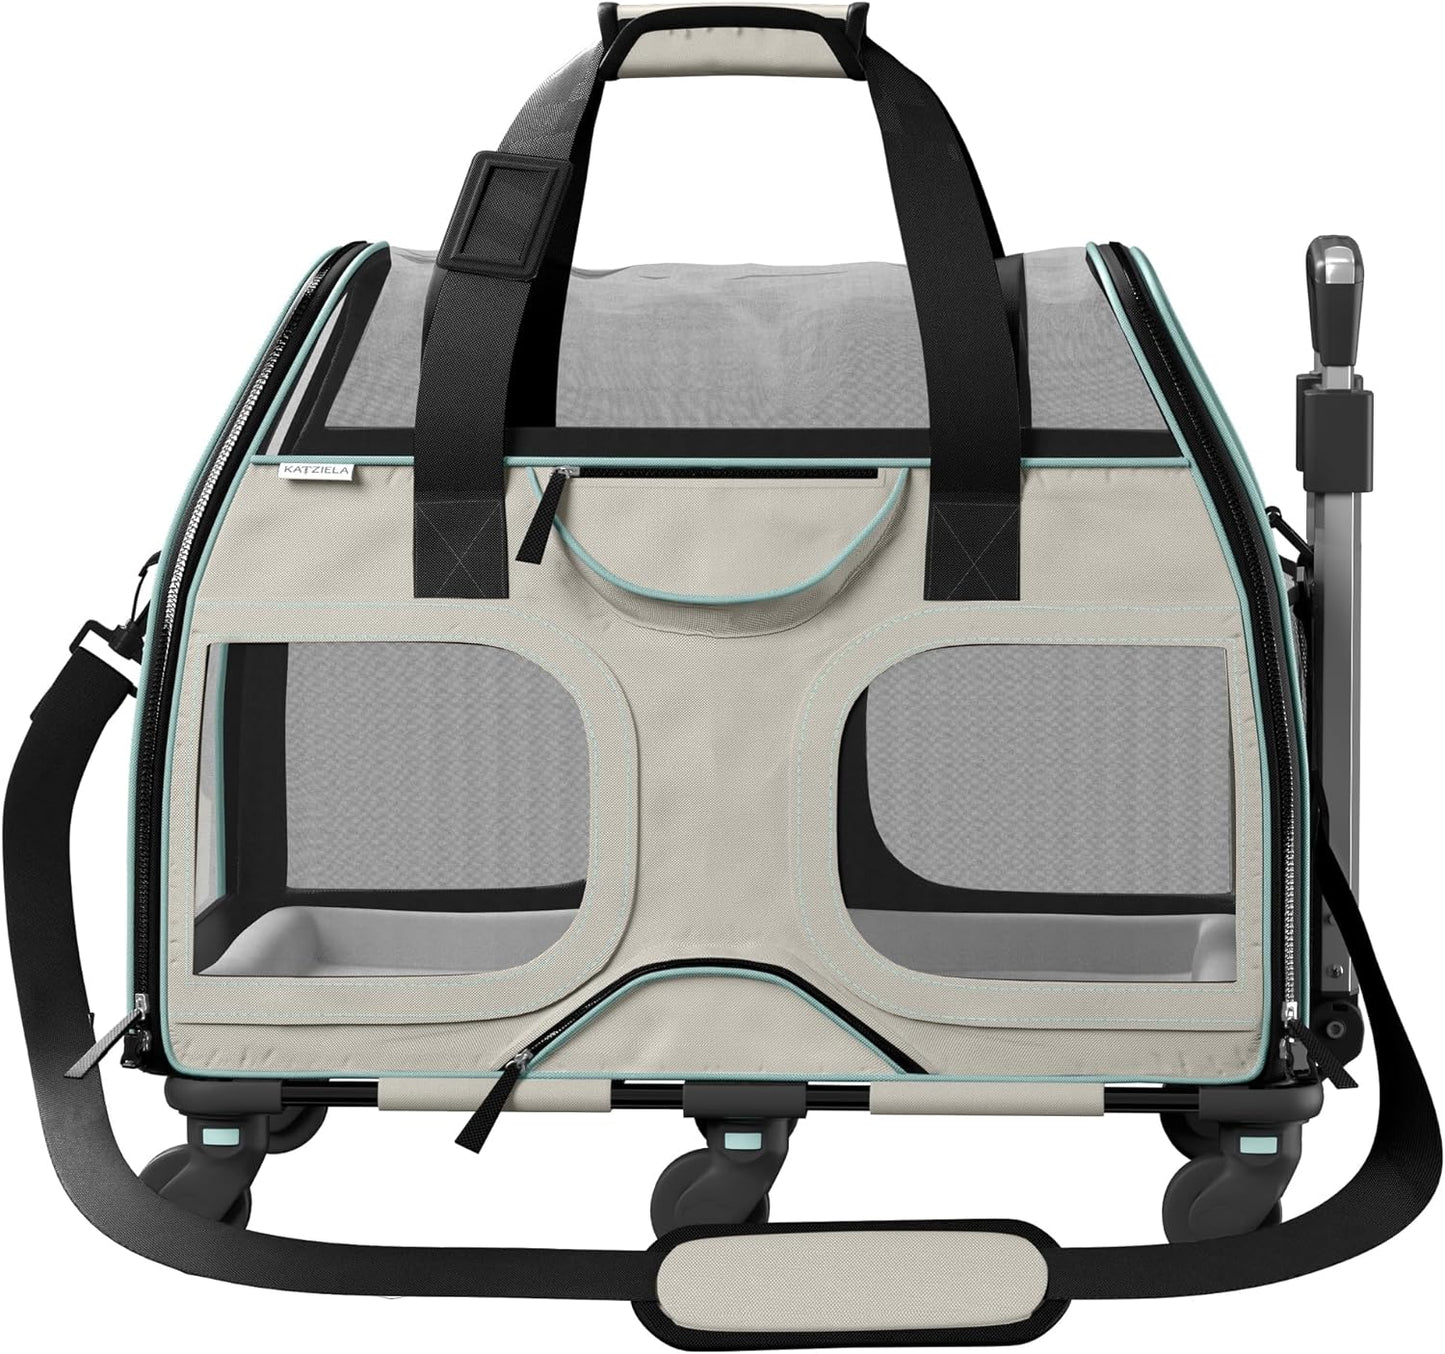 Rolling Pet Carrier for Small Dogs and Cats - Airline Compliant, TSA Approved